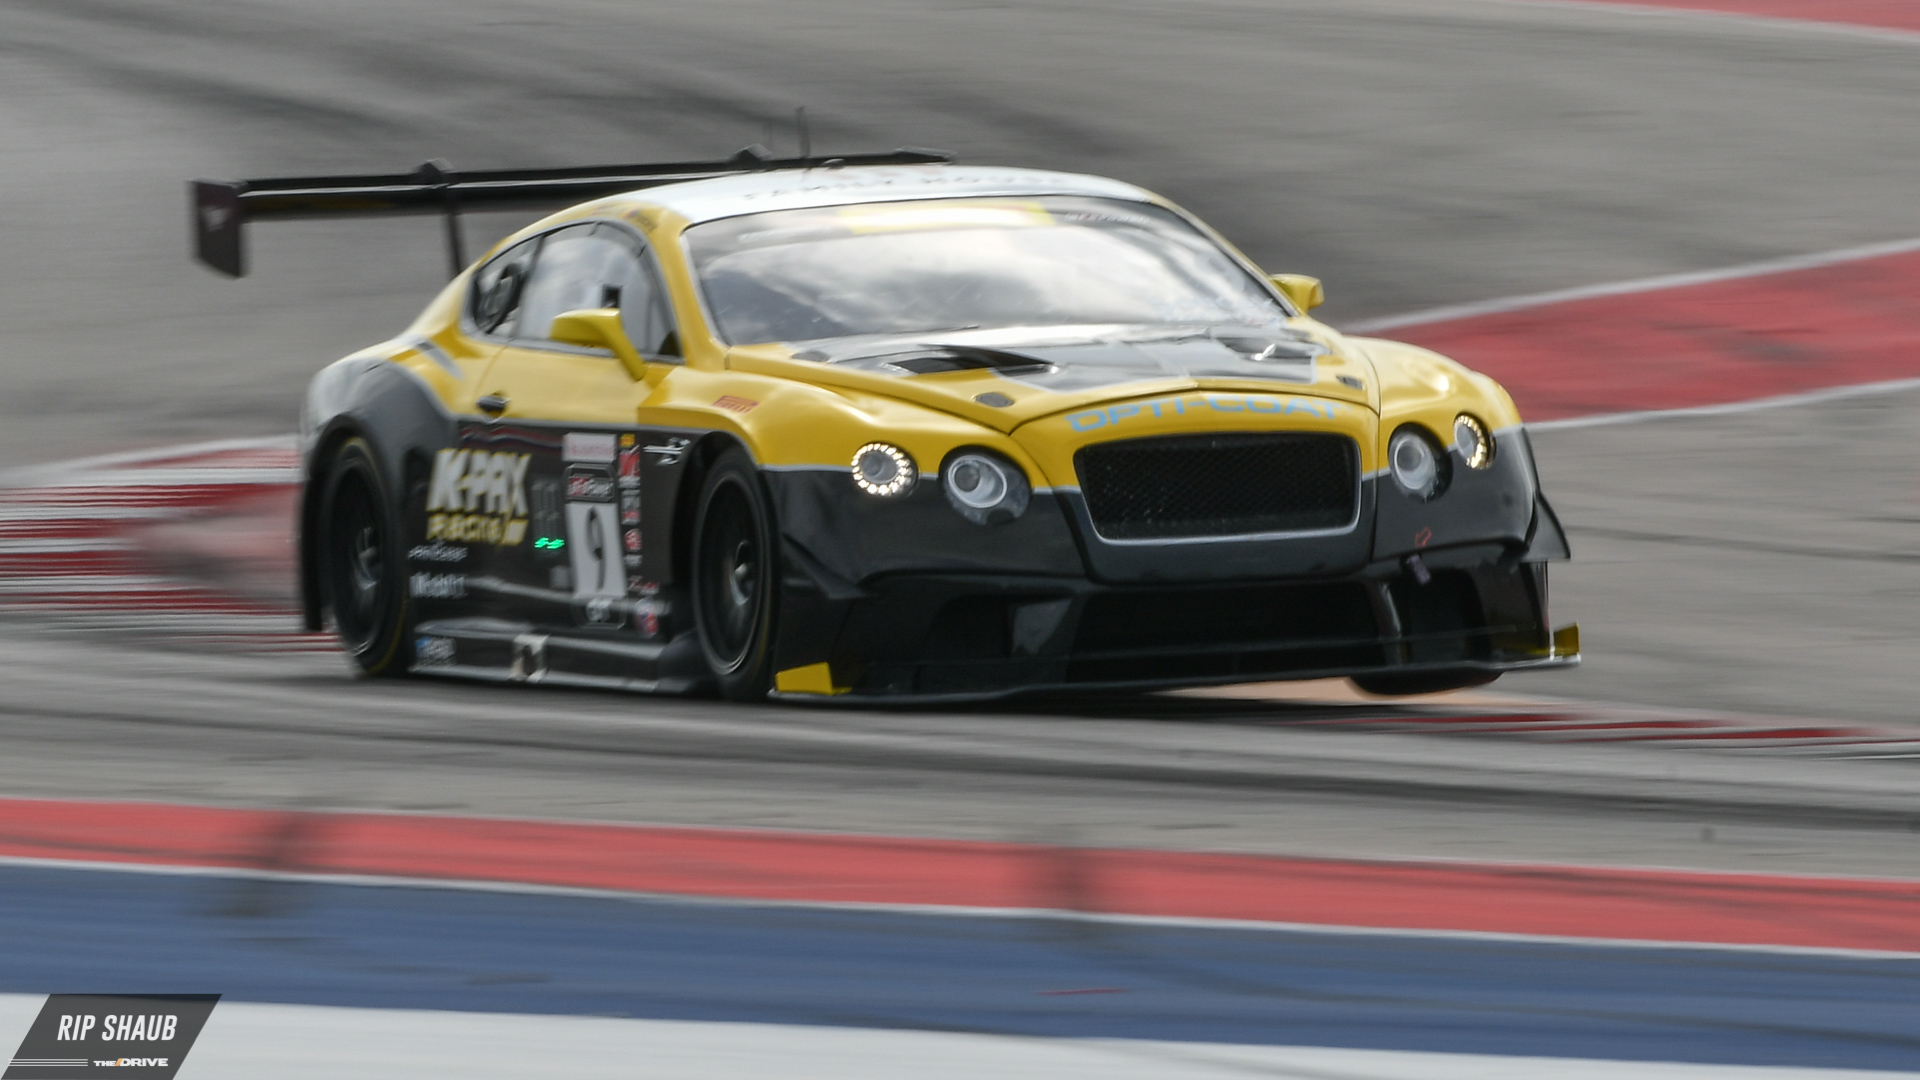 K-Pax brought a pair of Bentley Continental GT3 racers, this one with Alvaro Parente and Andy Soucek., <i>© Rip Shaub - All Rights Reserved</i>